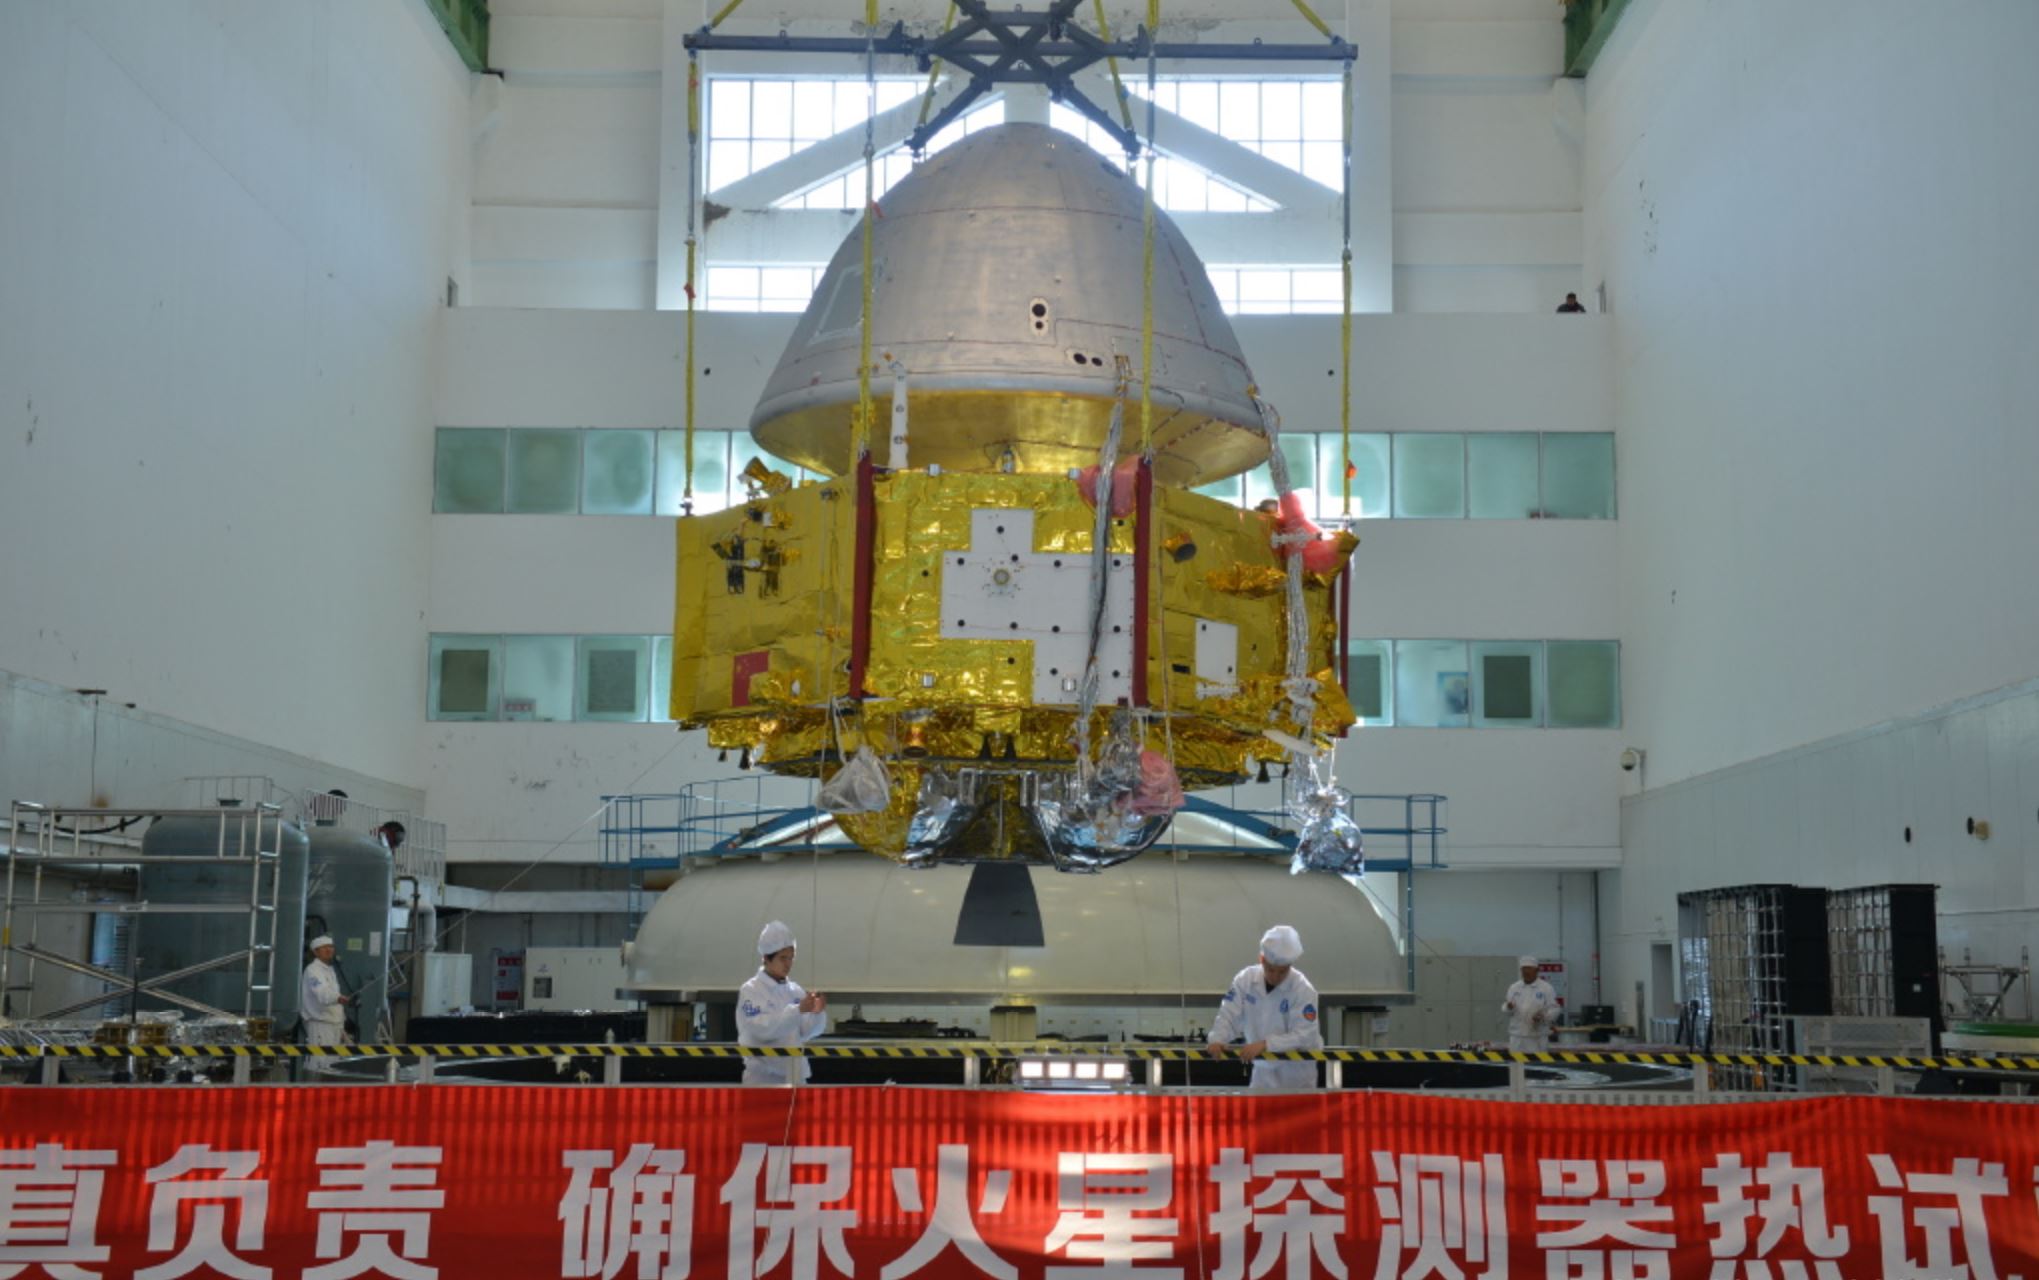 https://spacenews.com/wp-content/uploads/2020/01/China-mars-spacecraft-space-environment-tests-CASC-October2019.jpg